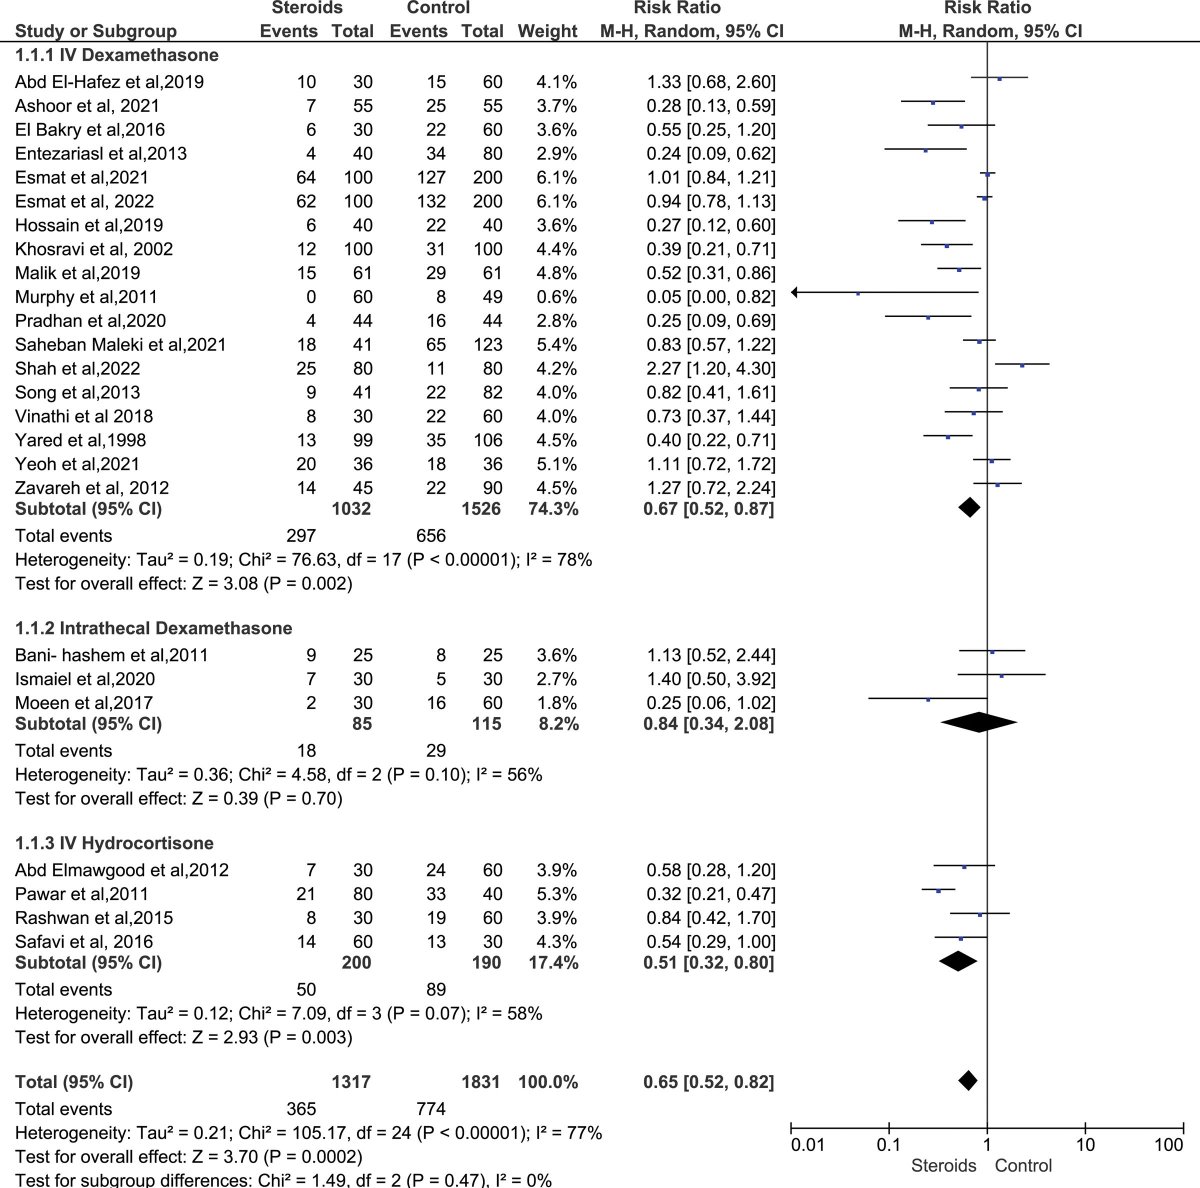 The Effect of Prophylactic Steroids on Shivering in Adults Undergoing Surgery: A Systematic Review and Meta-analysis of Randomized Controlled Trials buff.ly/3scJPGv Prophylactic steroid administration may be beneficial in reducing the risk of perioperative shivering